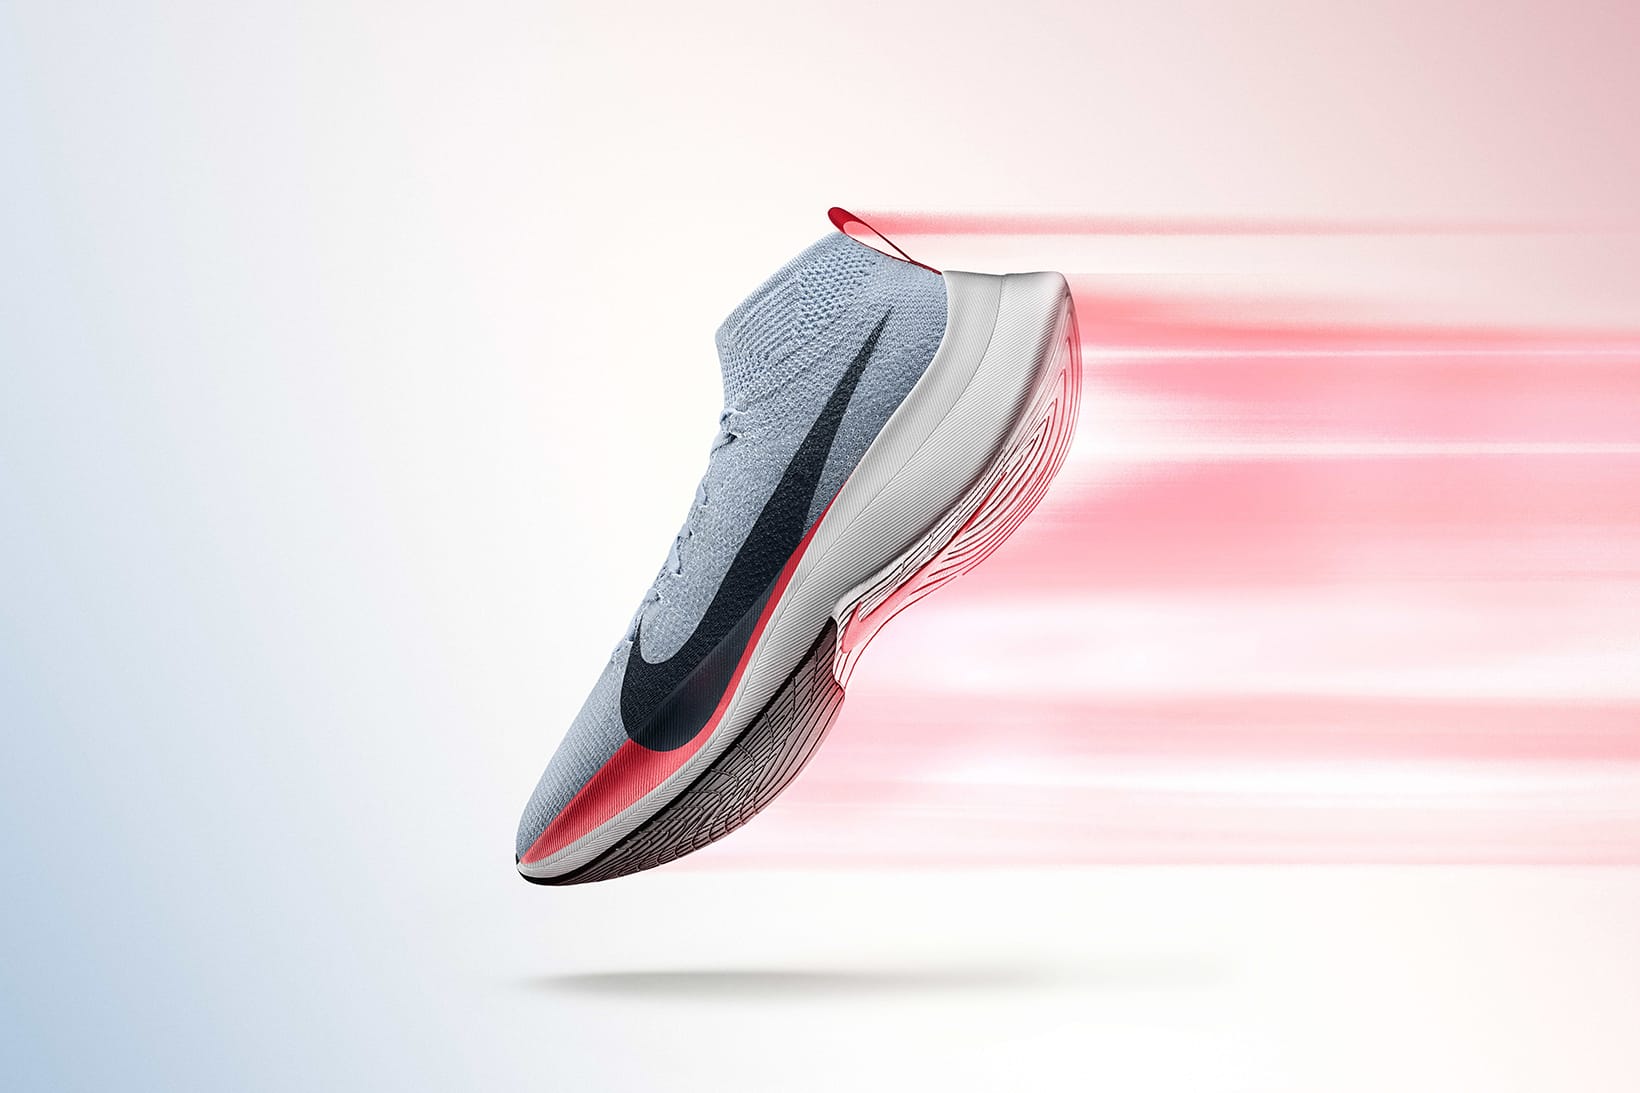 vaporfly for sale